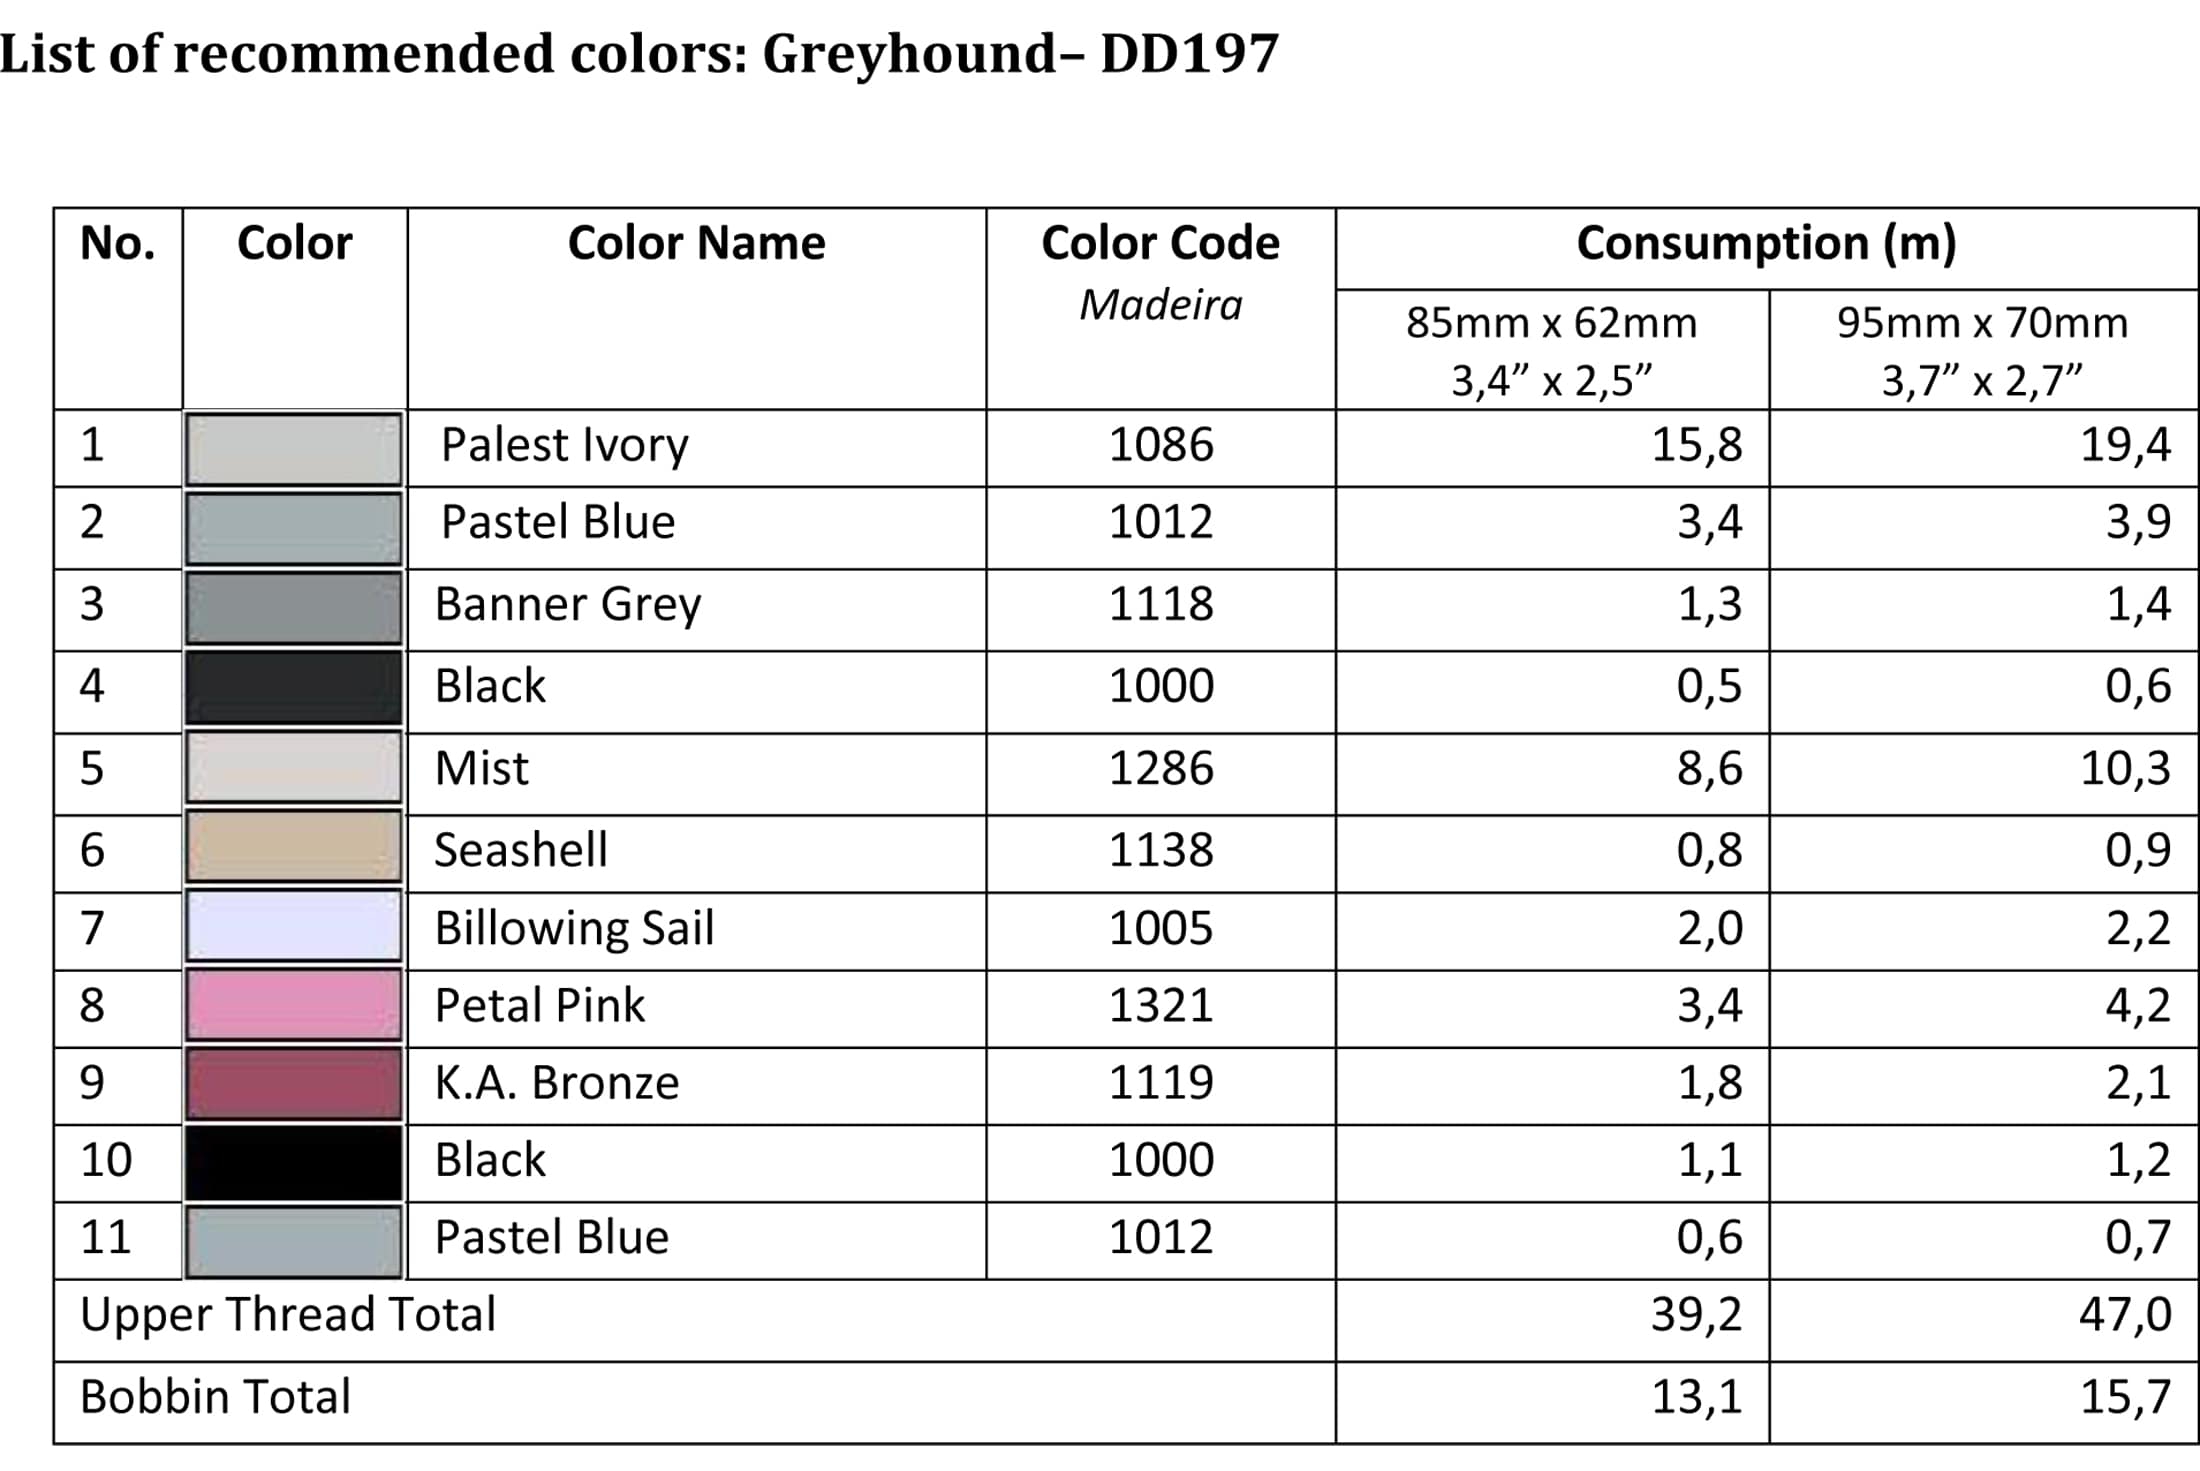 List of recommended colors - DD197